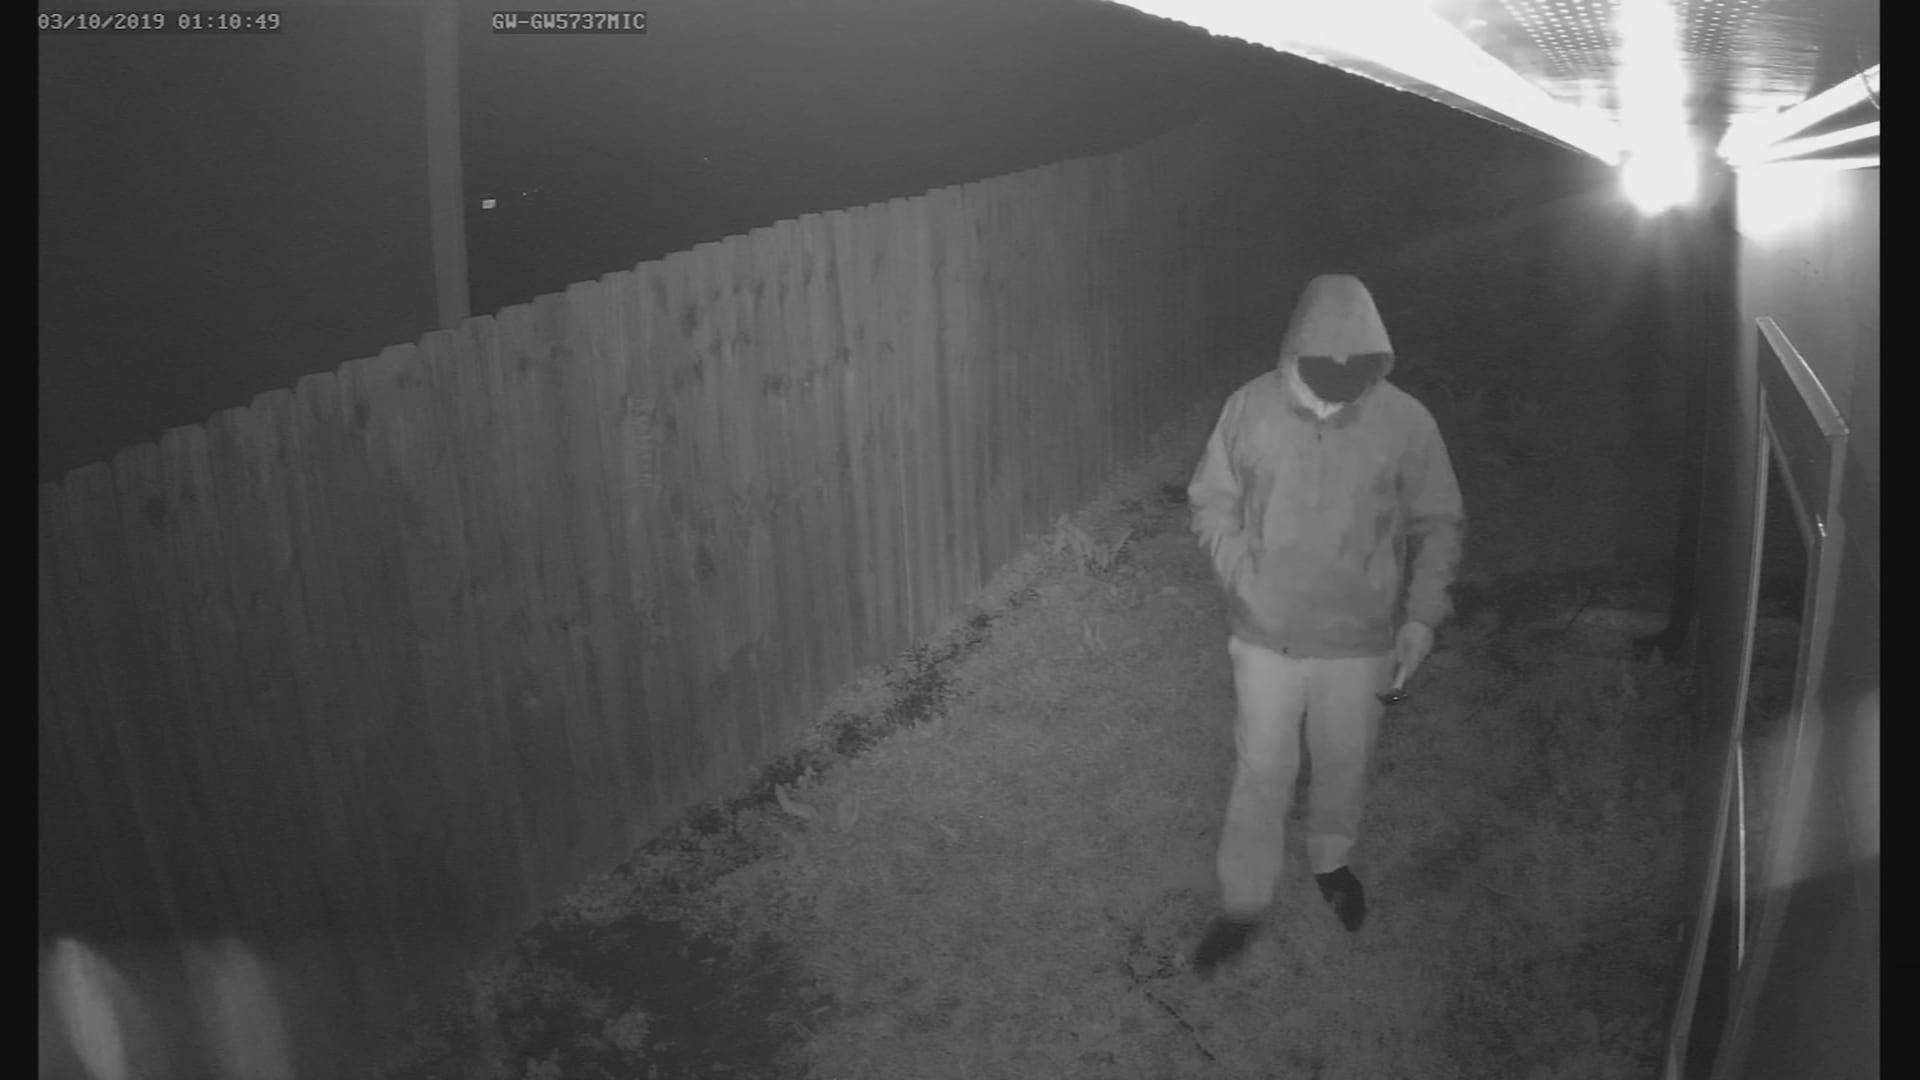 Surveillance footage CNBC obtained captures someone breaking into Zhong's home in March 2019.